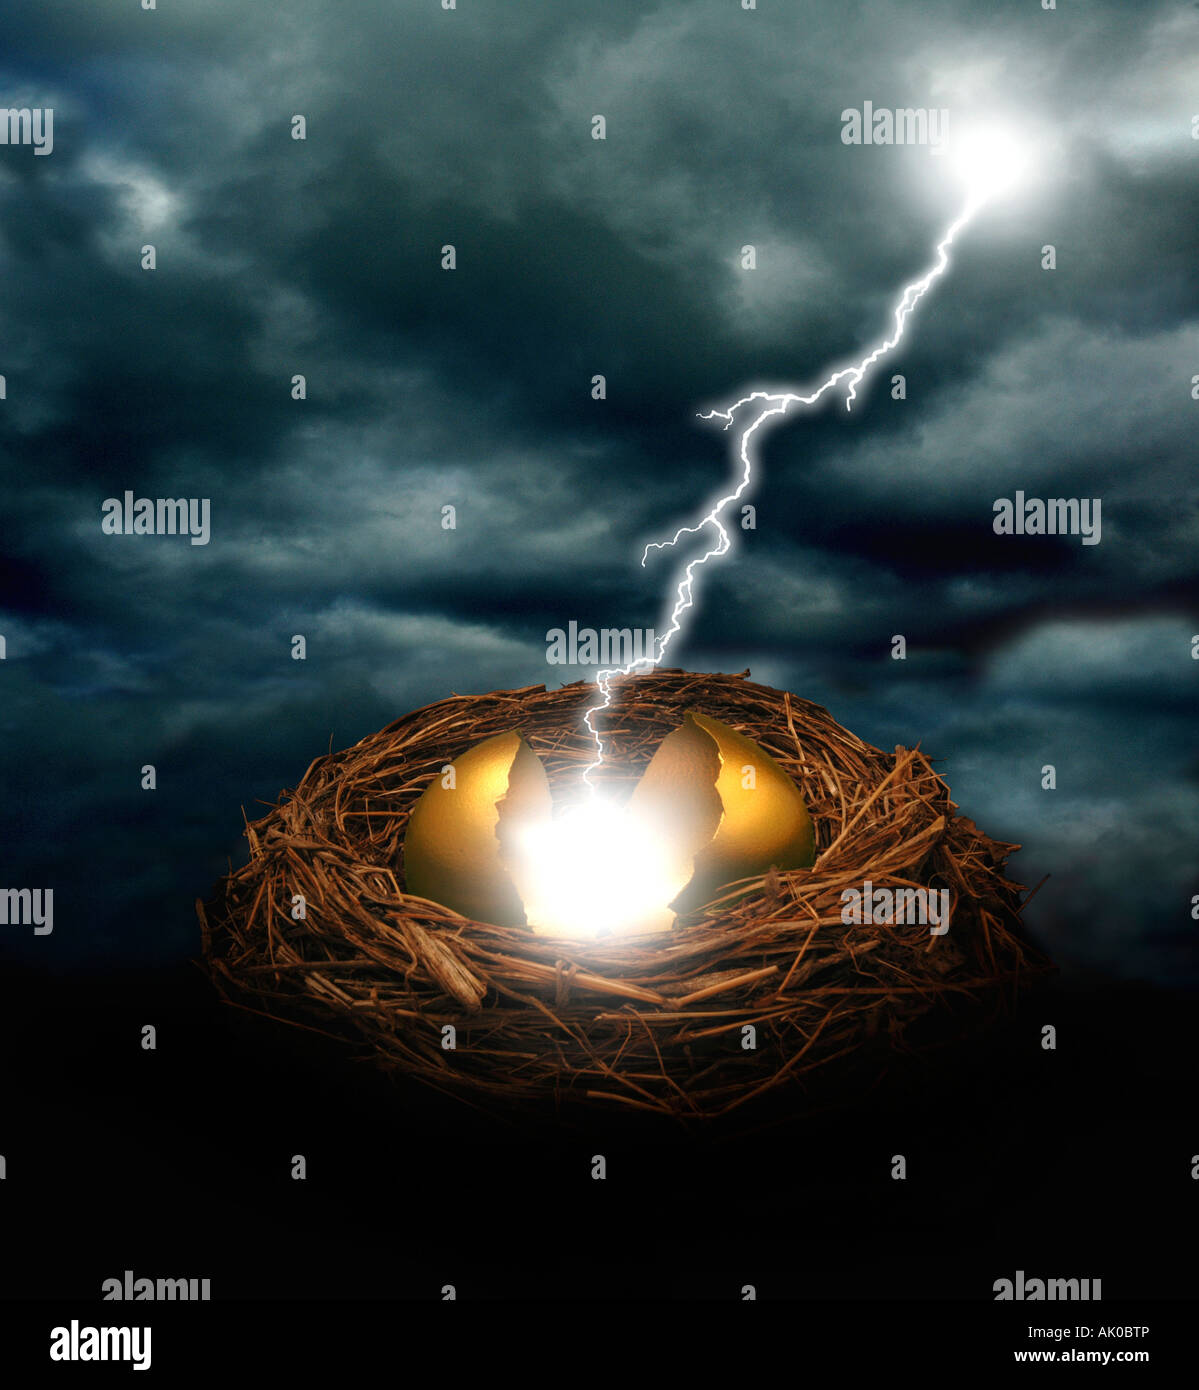 A golden nest egg cracked open by a bolt of lightning under a dark cloudy sky Could symbolize financial crash threat or disaster Stock Photo